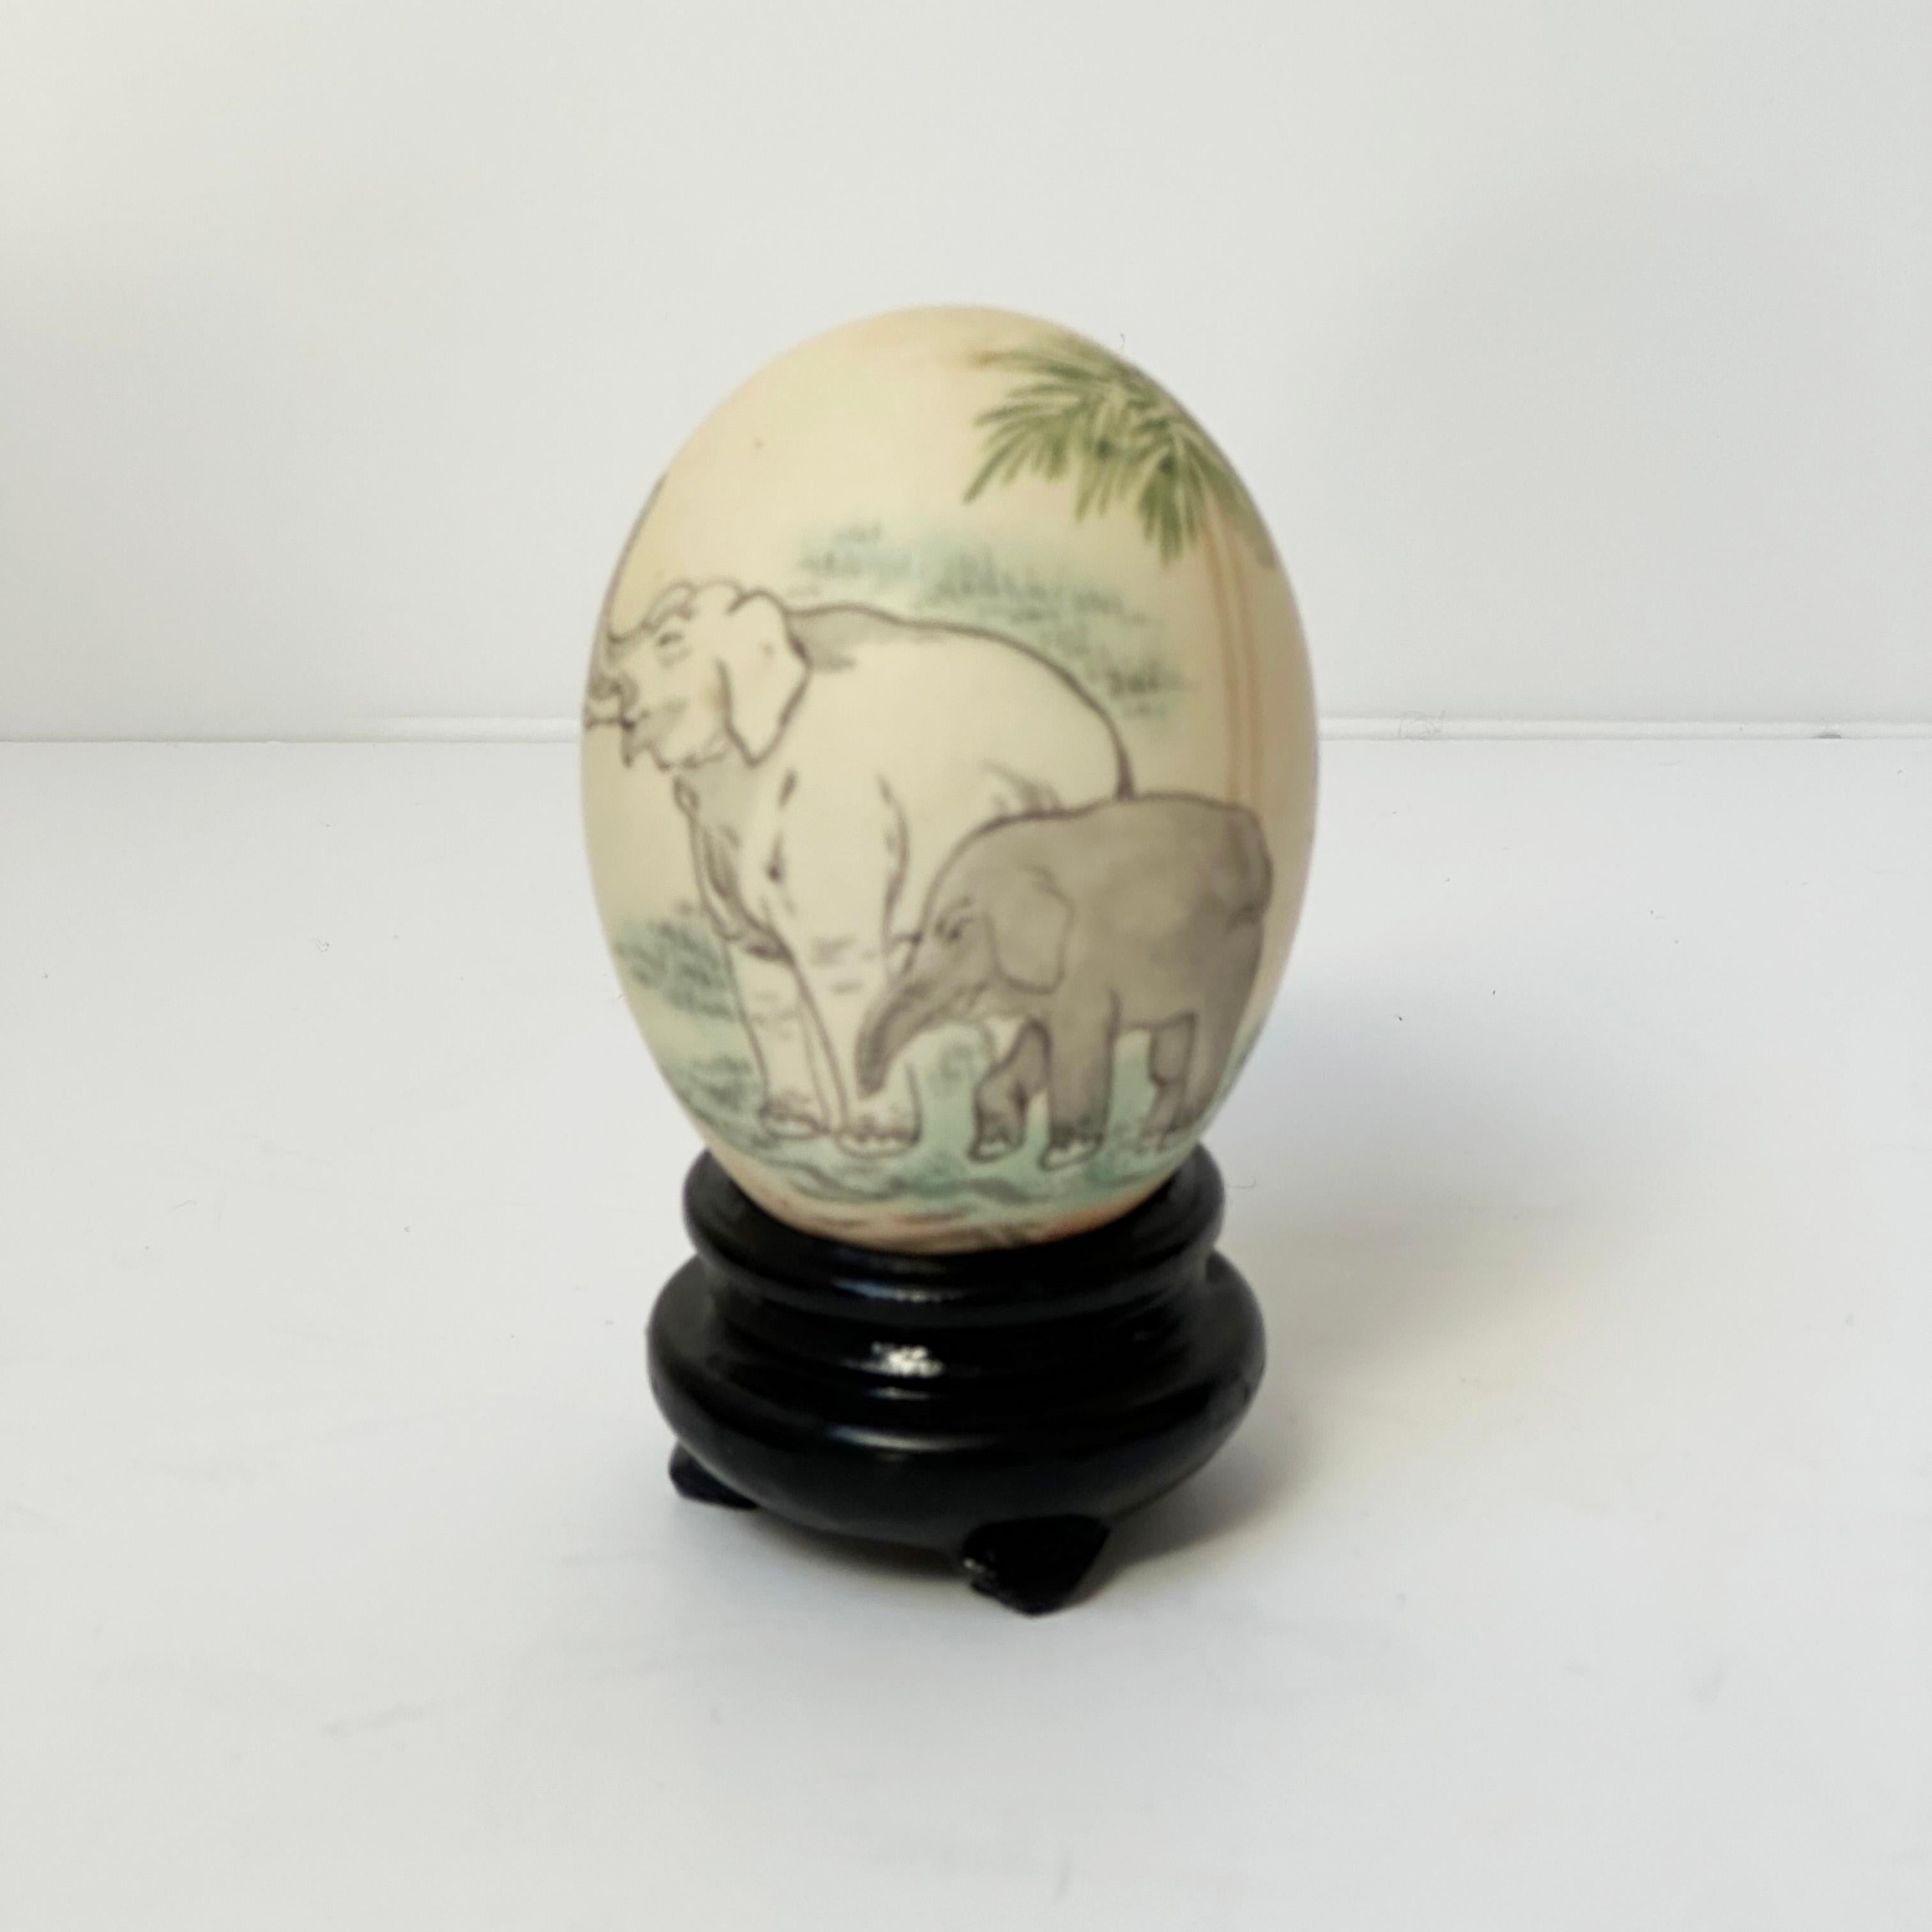 Vintage Chinese Painted Eggshells on Wooden Display Plinths - Set of 6 For Sale 1